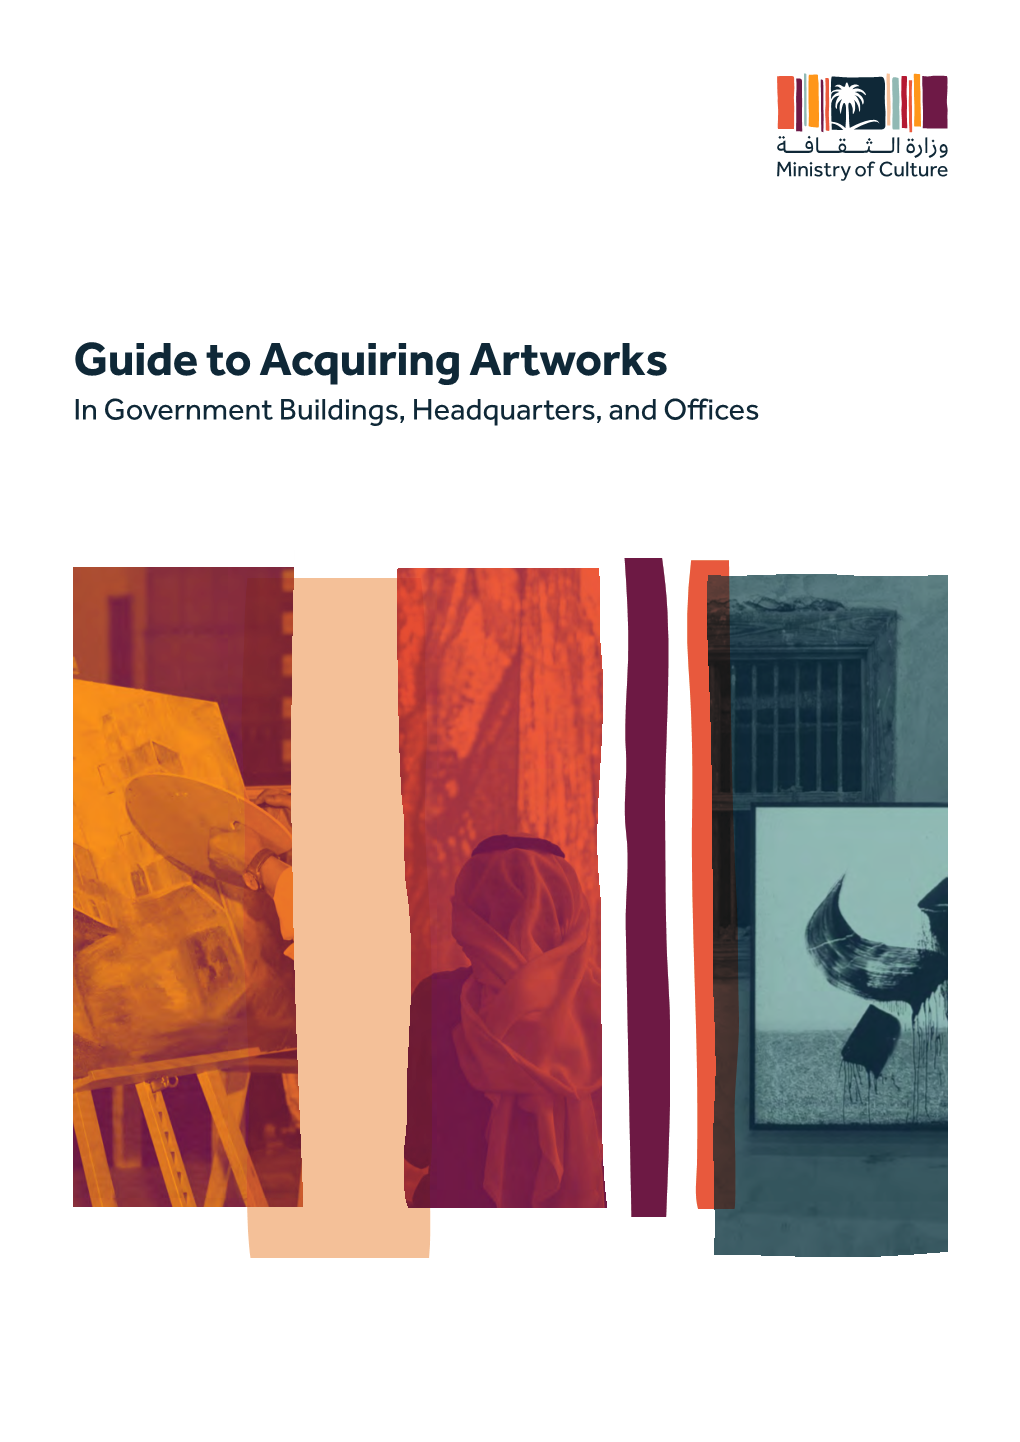 Guide to Acquiring Artworks in Government Buildings, Headquarters, and Offices